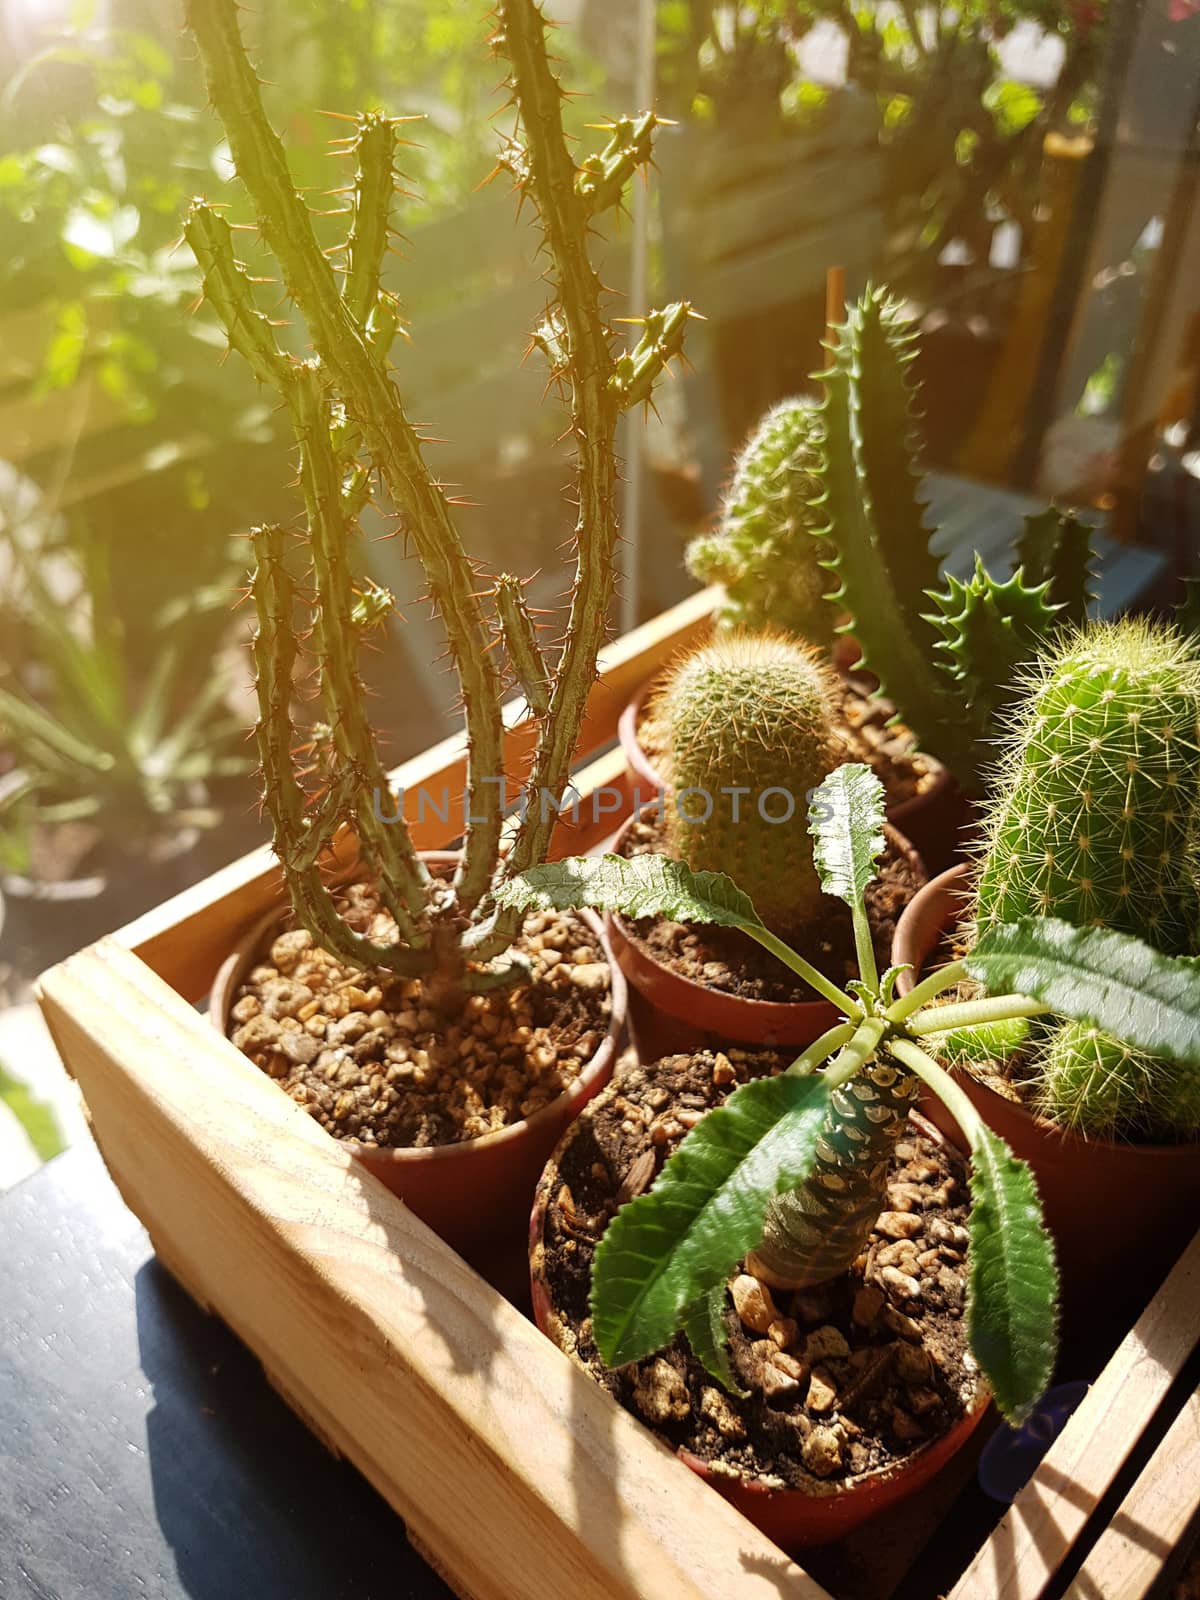 cactus in vintage wooden pot with morning light, cactus cultivation is a popular hobby